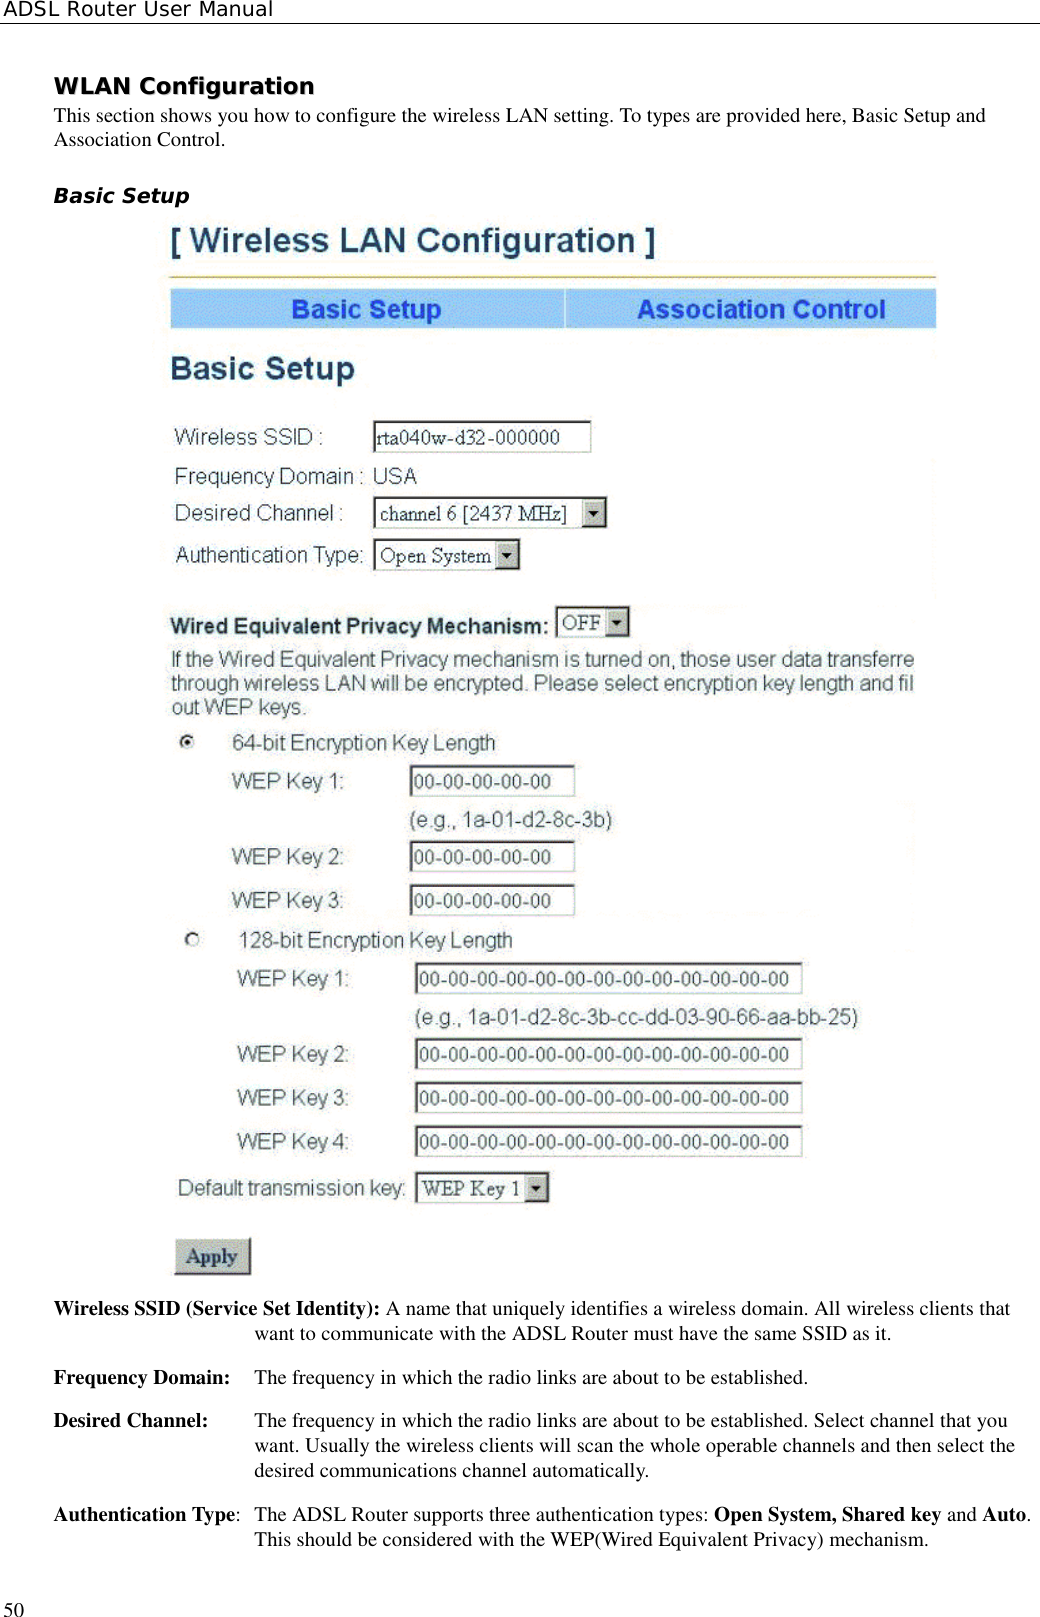 ADSL Router User Manual50WWLLAANN  CCoonnffiigguurraattiioonnThis section shows you how to configure the wireless LAN setting. To types are provided here, Basic Setup andAssociation Control.Basic SetupWireless SSID (Service Set Identity): A name that uniquely identifies a wireless domain. All wireless clients thatwant to communicate with the ADSL Router must have the same SSID as it.Frequency Domain:  The frequency in which the radio links are about to be established.Desired Channel:  The frequency in which the radio links are about to be established. Select channel that youwant. Usually the wireless clients will scan the whole operable channels and then select thedesired communications channel automatically.Authentication Type:  The ADSL Router supports three authentication types: Open System, Shared key and Auto.This should be considered with the WEP(Wired Equivalent Privacy) mechanism.